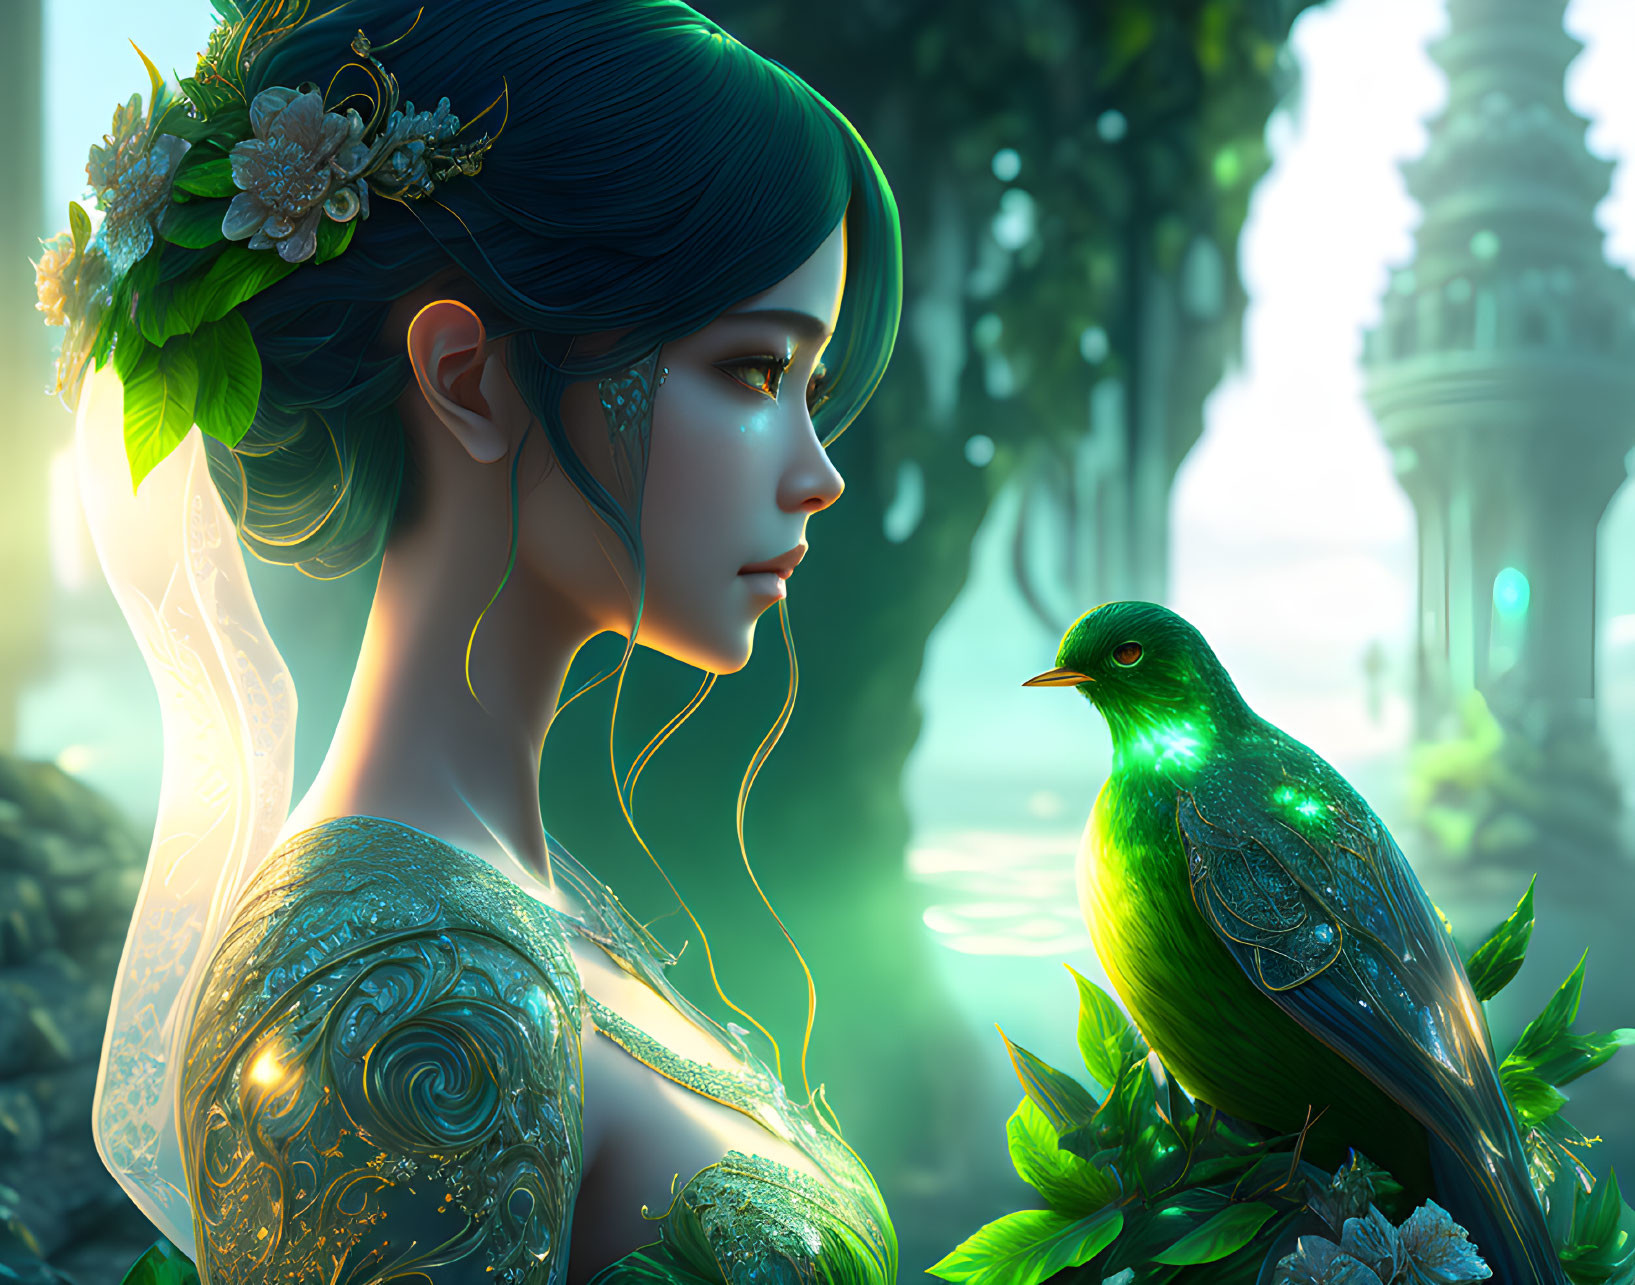 Fantasy illustration: Woman in nature attire with green bird in mystical forest